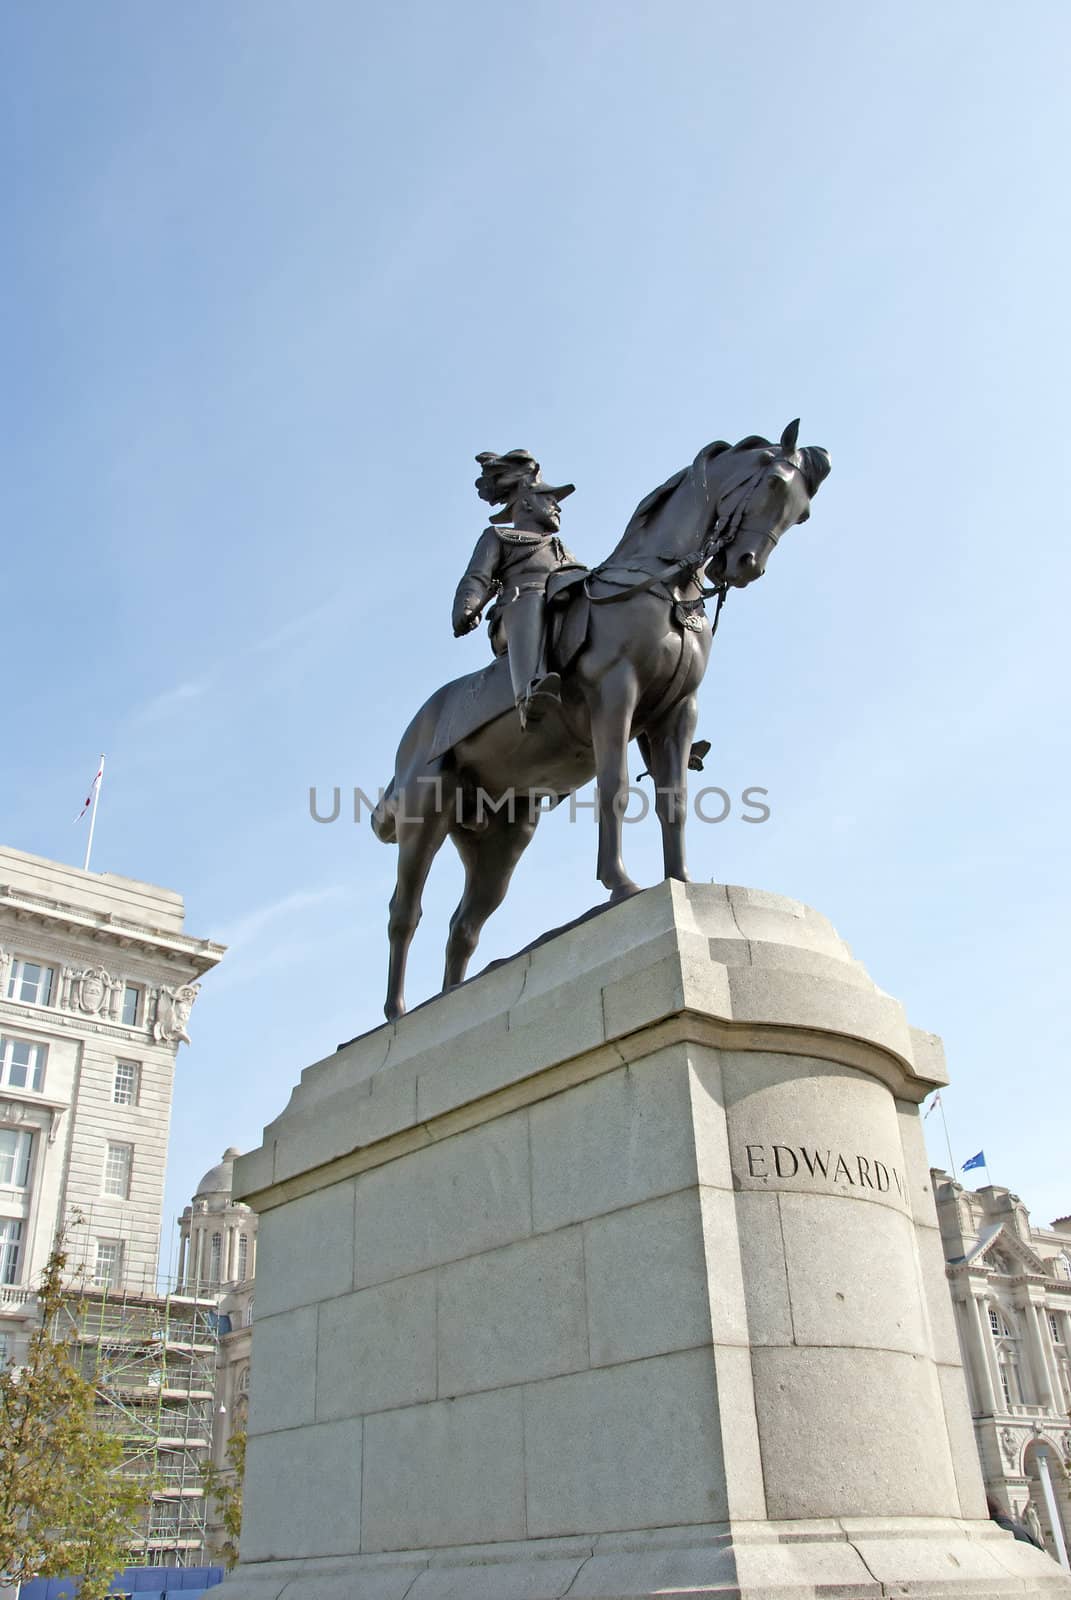 A Statue of King Edward VII of England in Liverpool